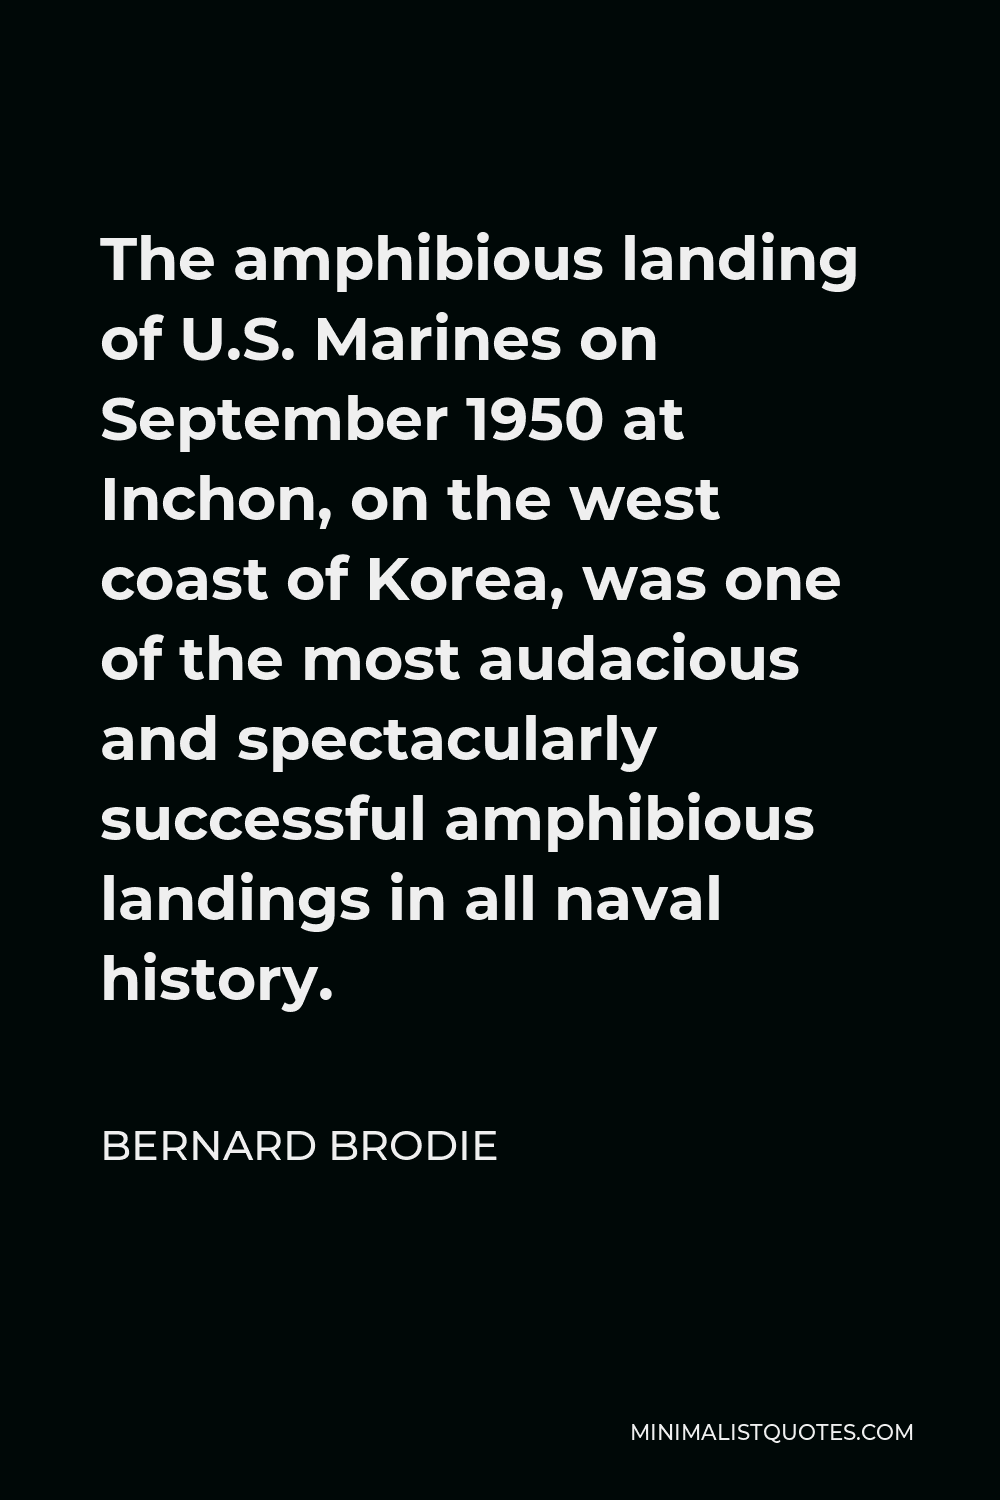 Bernard Brodie Quote - The amphibious landing of U.S. Marines on September 1950 at Inchon, on the west coast of Korea, was one of the most audacious and spectacularly successful amphibious landings in all naval history.